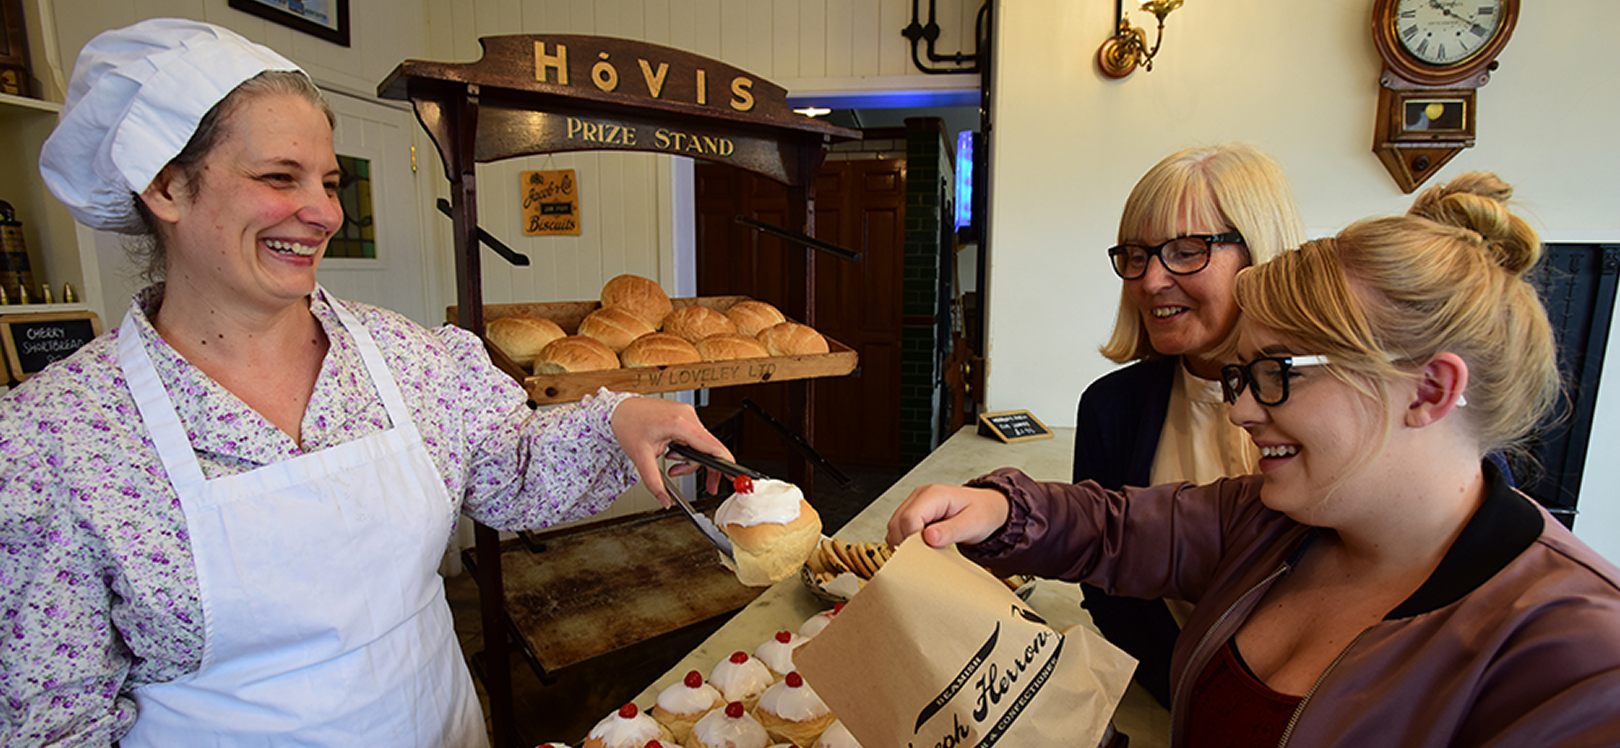 Two people being served at the bakery in Beamish